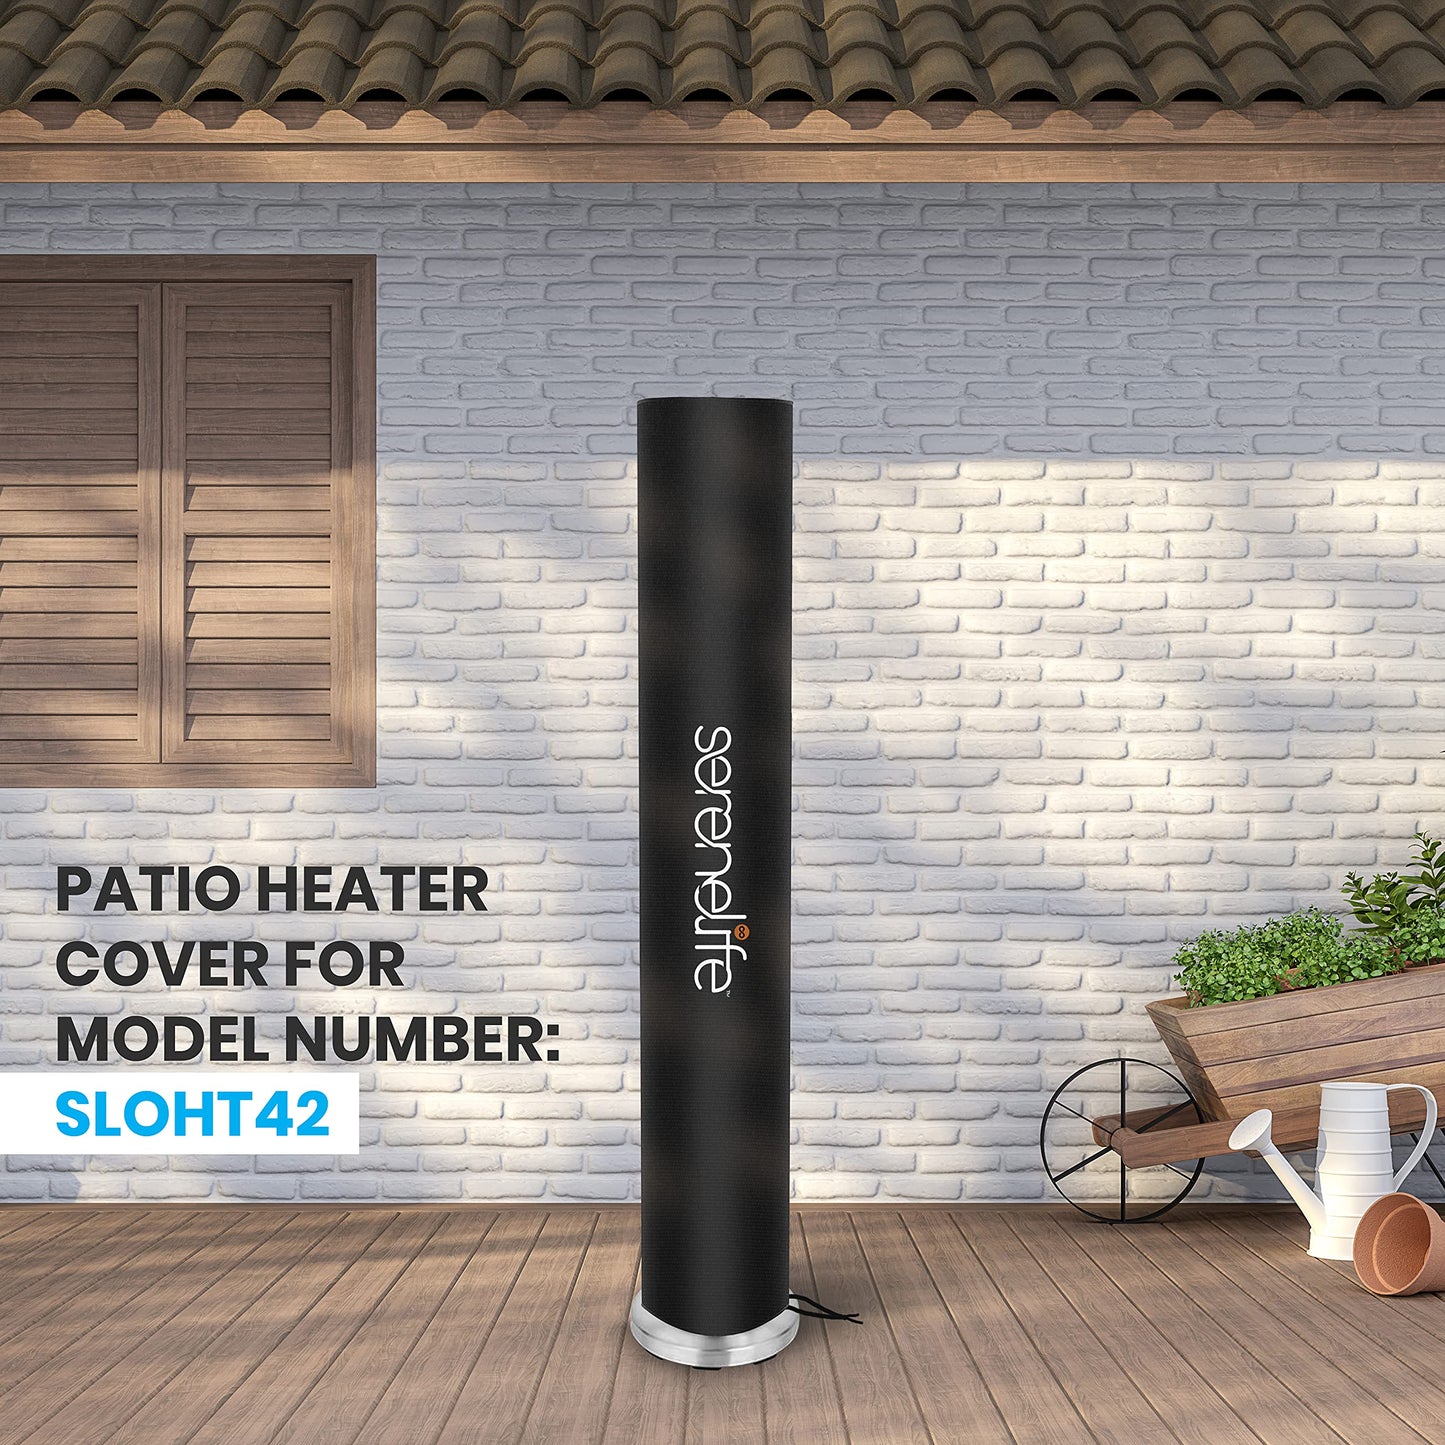 Outdoor Patio Heater Cover Bag - Heavy-Duty Patio Heater Cover for SLOHT42 Infrared Outdoor Electric Space Heater - Waterproof Dustproof, Wind/Sunlight/Snow Resistant - SLOHT421